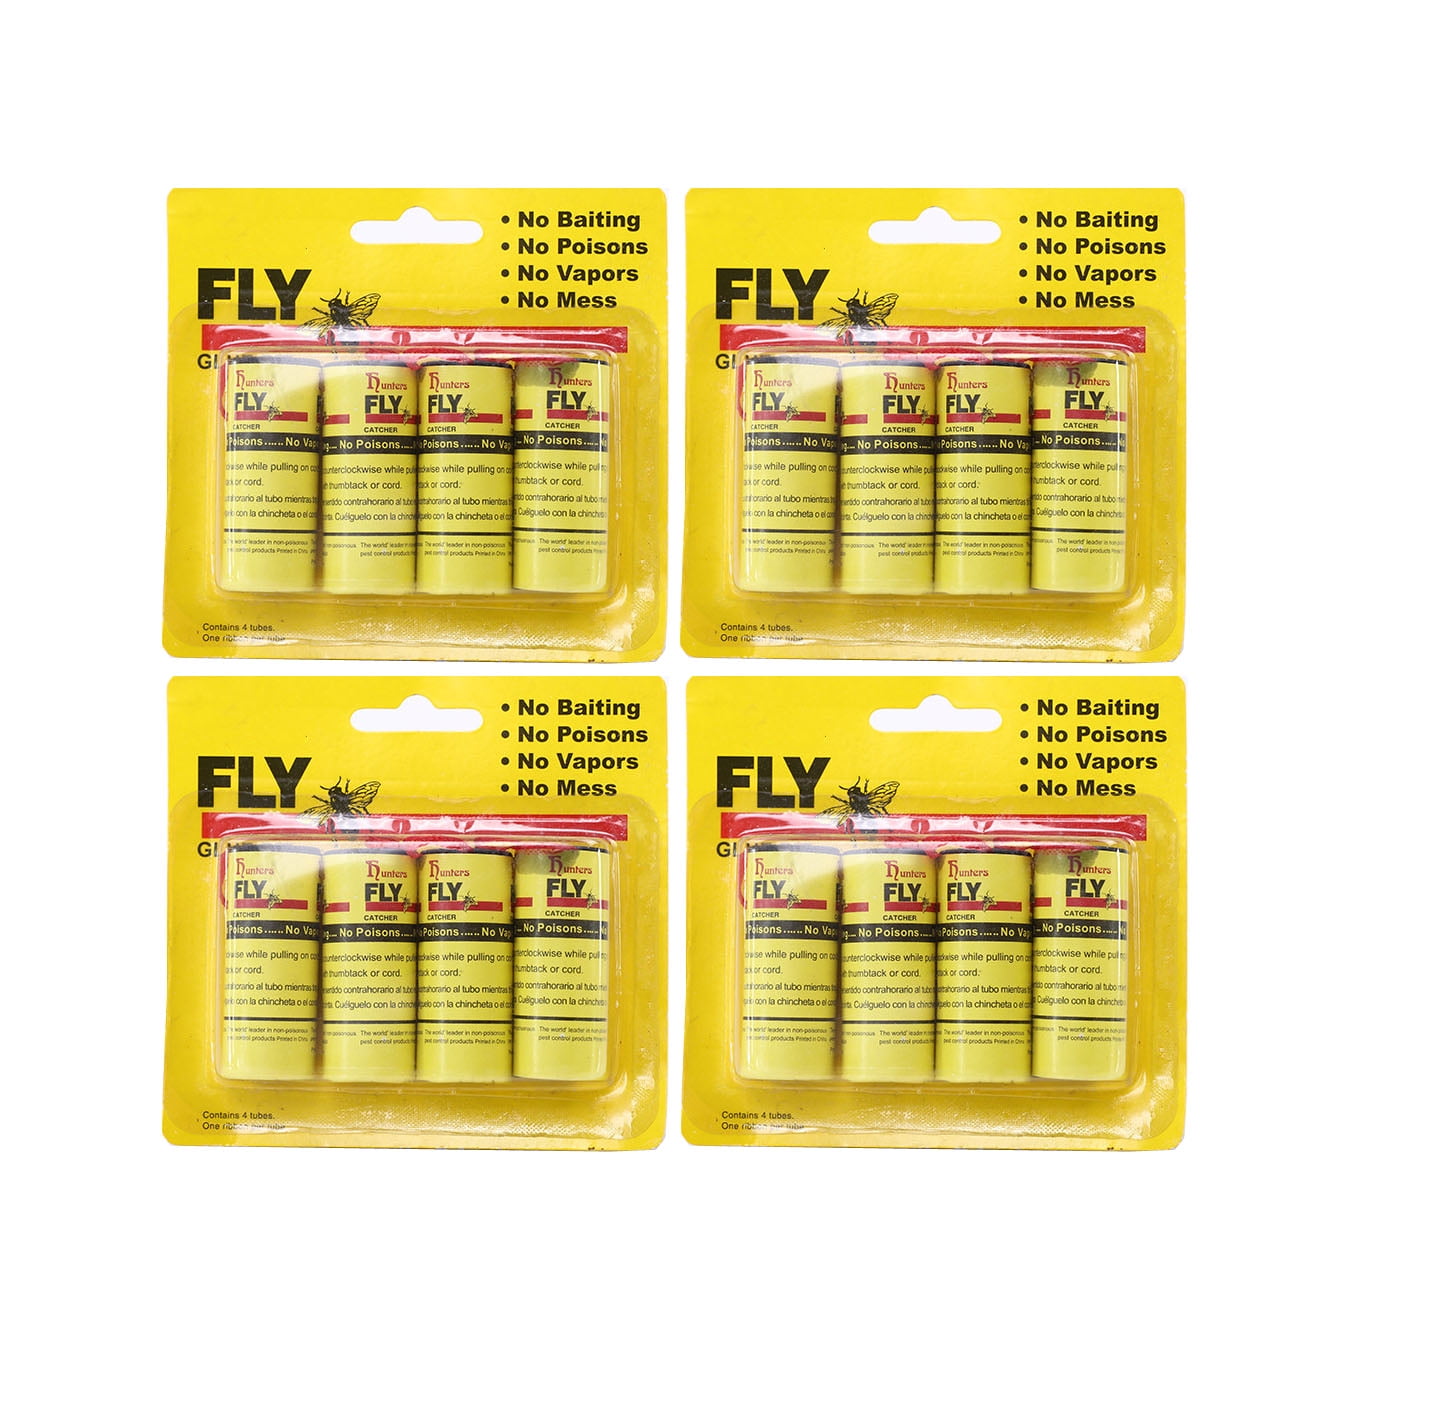 16 Rolls Fly Paper Strips - Fly Tapes Fly Paper Sticky Fly Trap  Indoor/Outdoor Hanging,Fly Catcher Fly Ribbon Fungus Gnat Trap Fruit Fly  Killer for Plants/House/Kitchen/Horse Stable (16) 